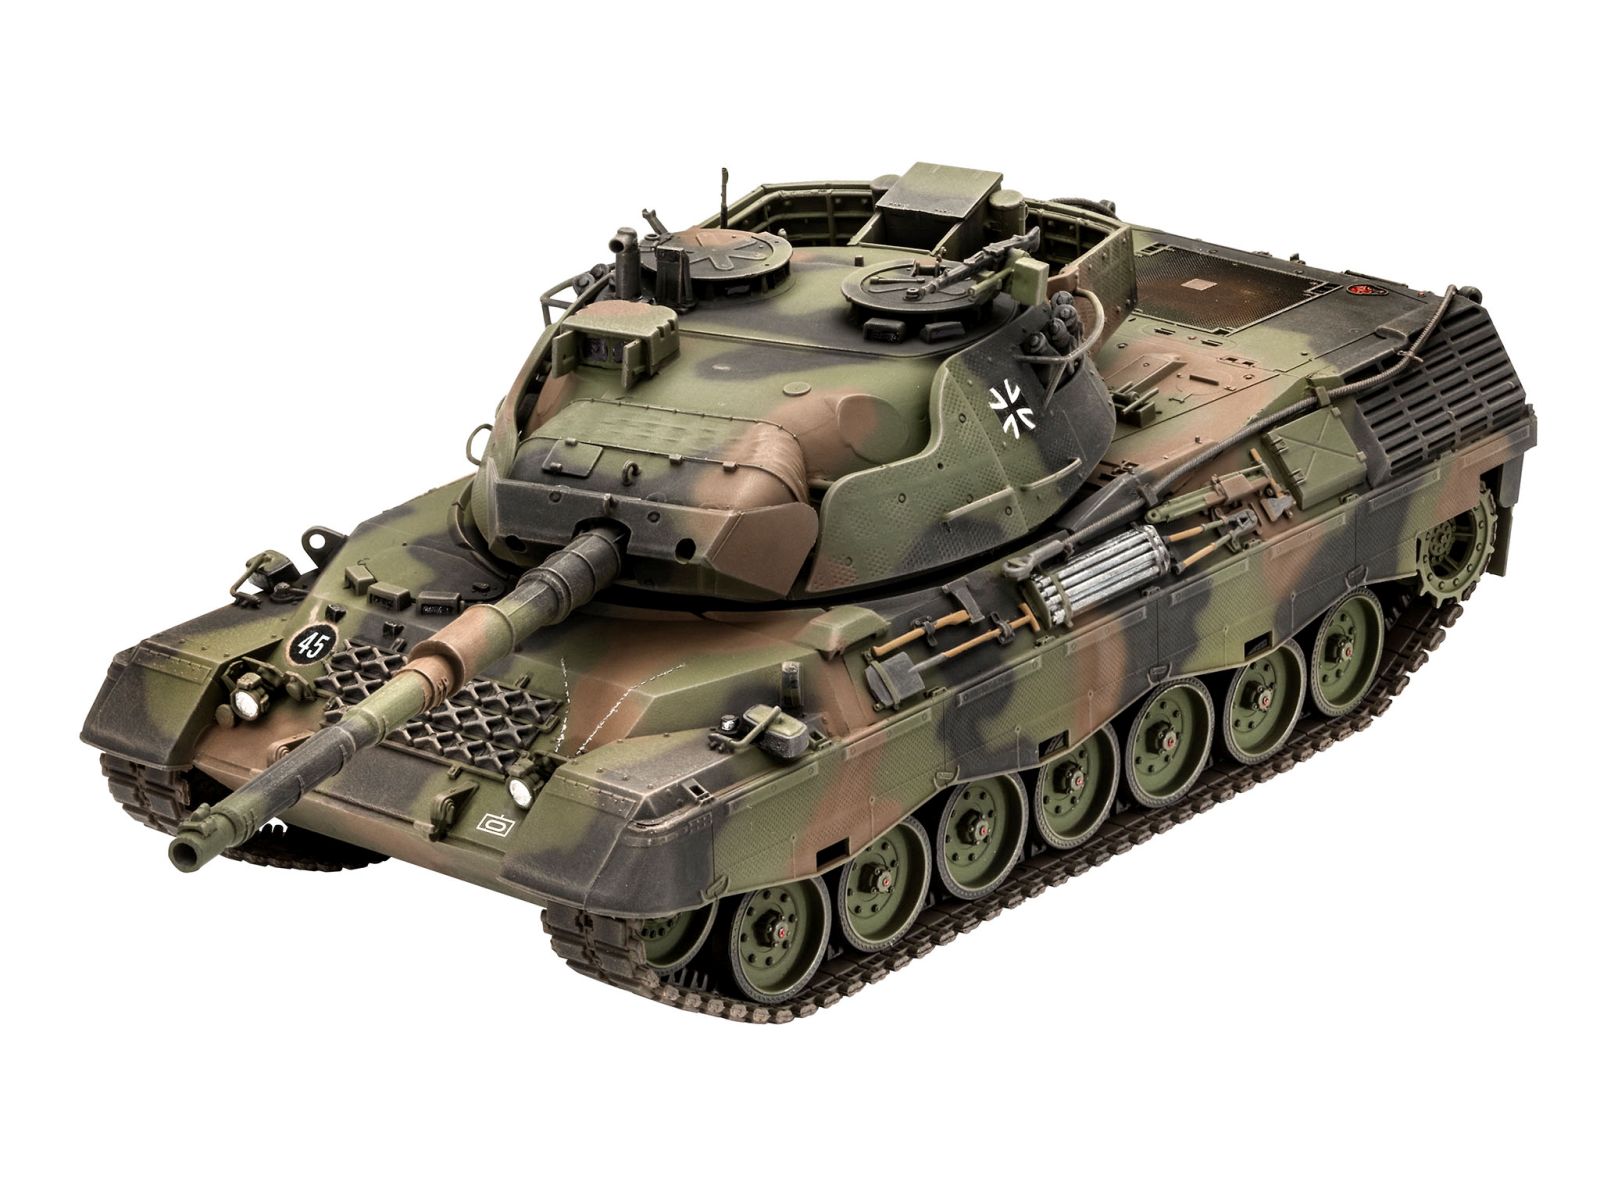 Revell 03320 - Leopard 1A5